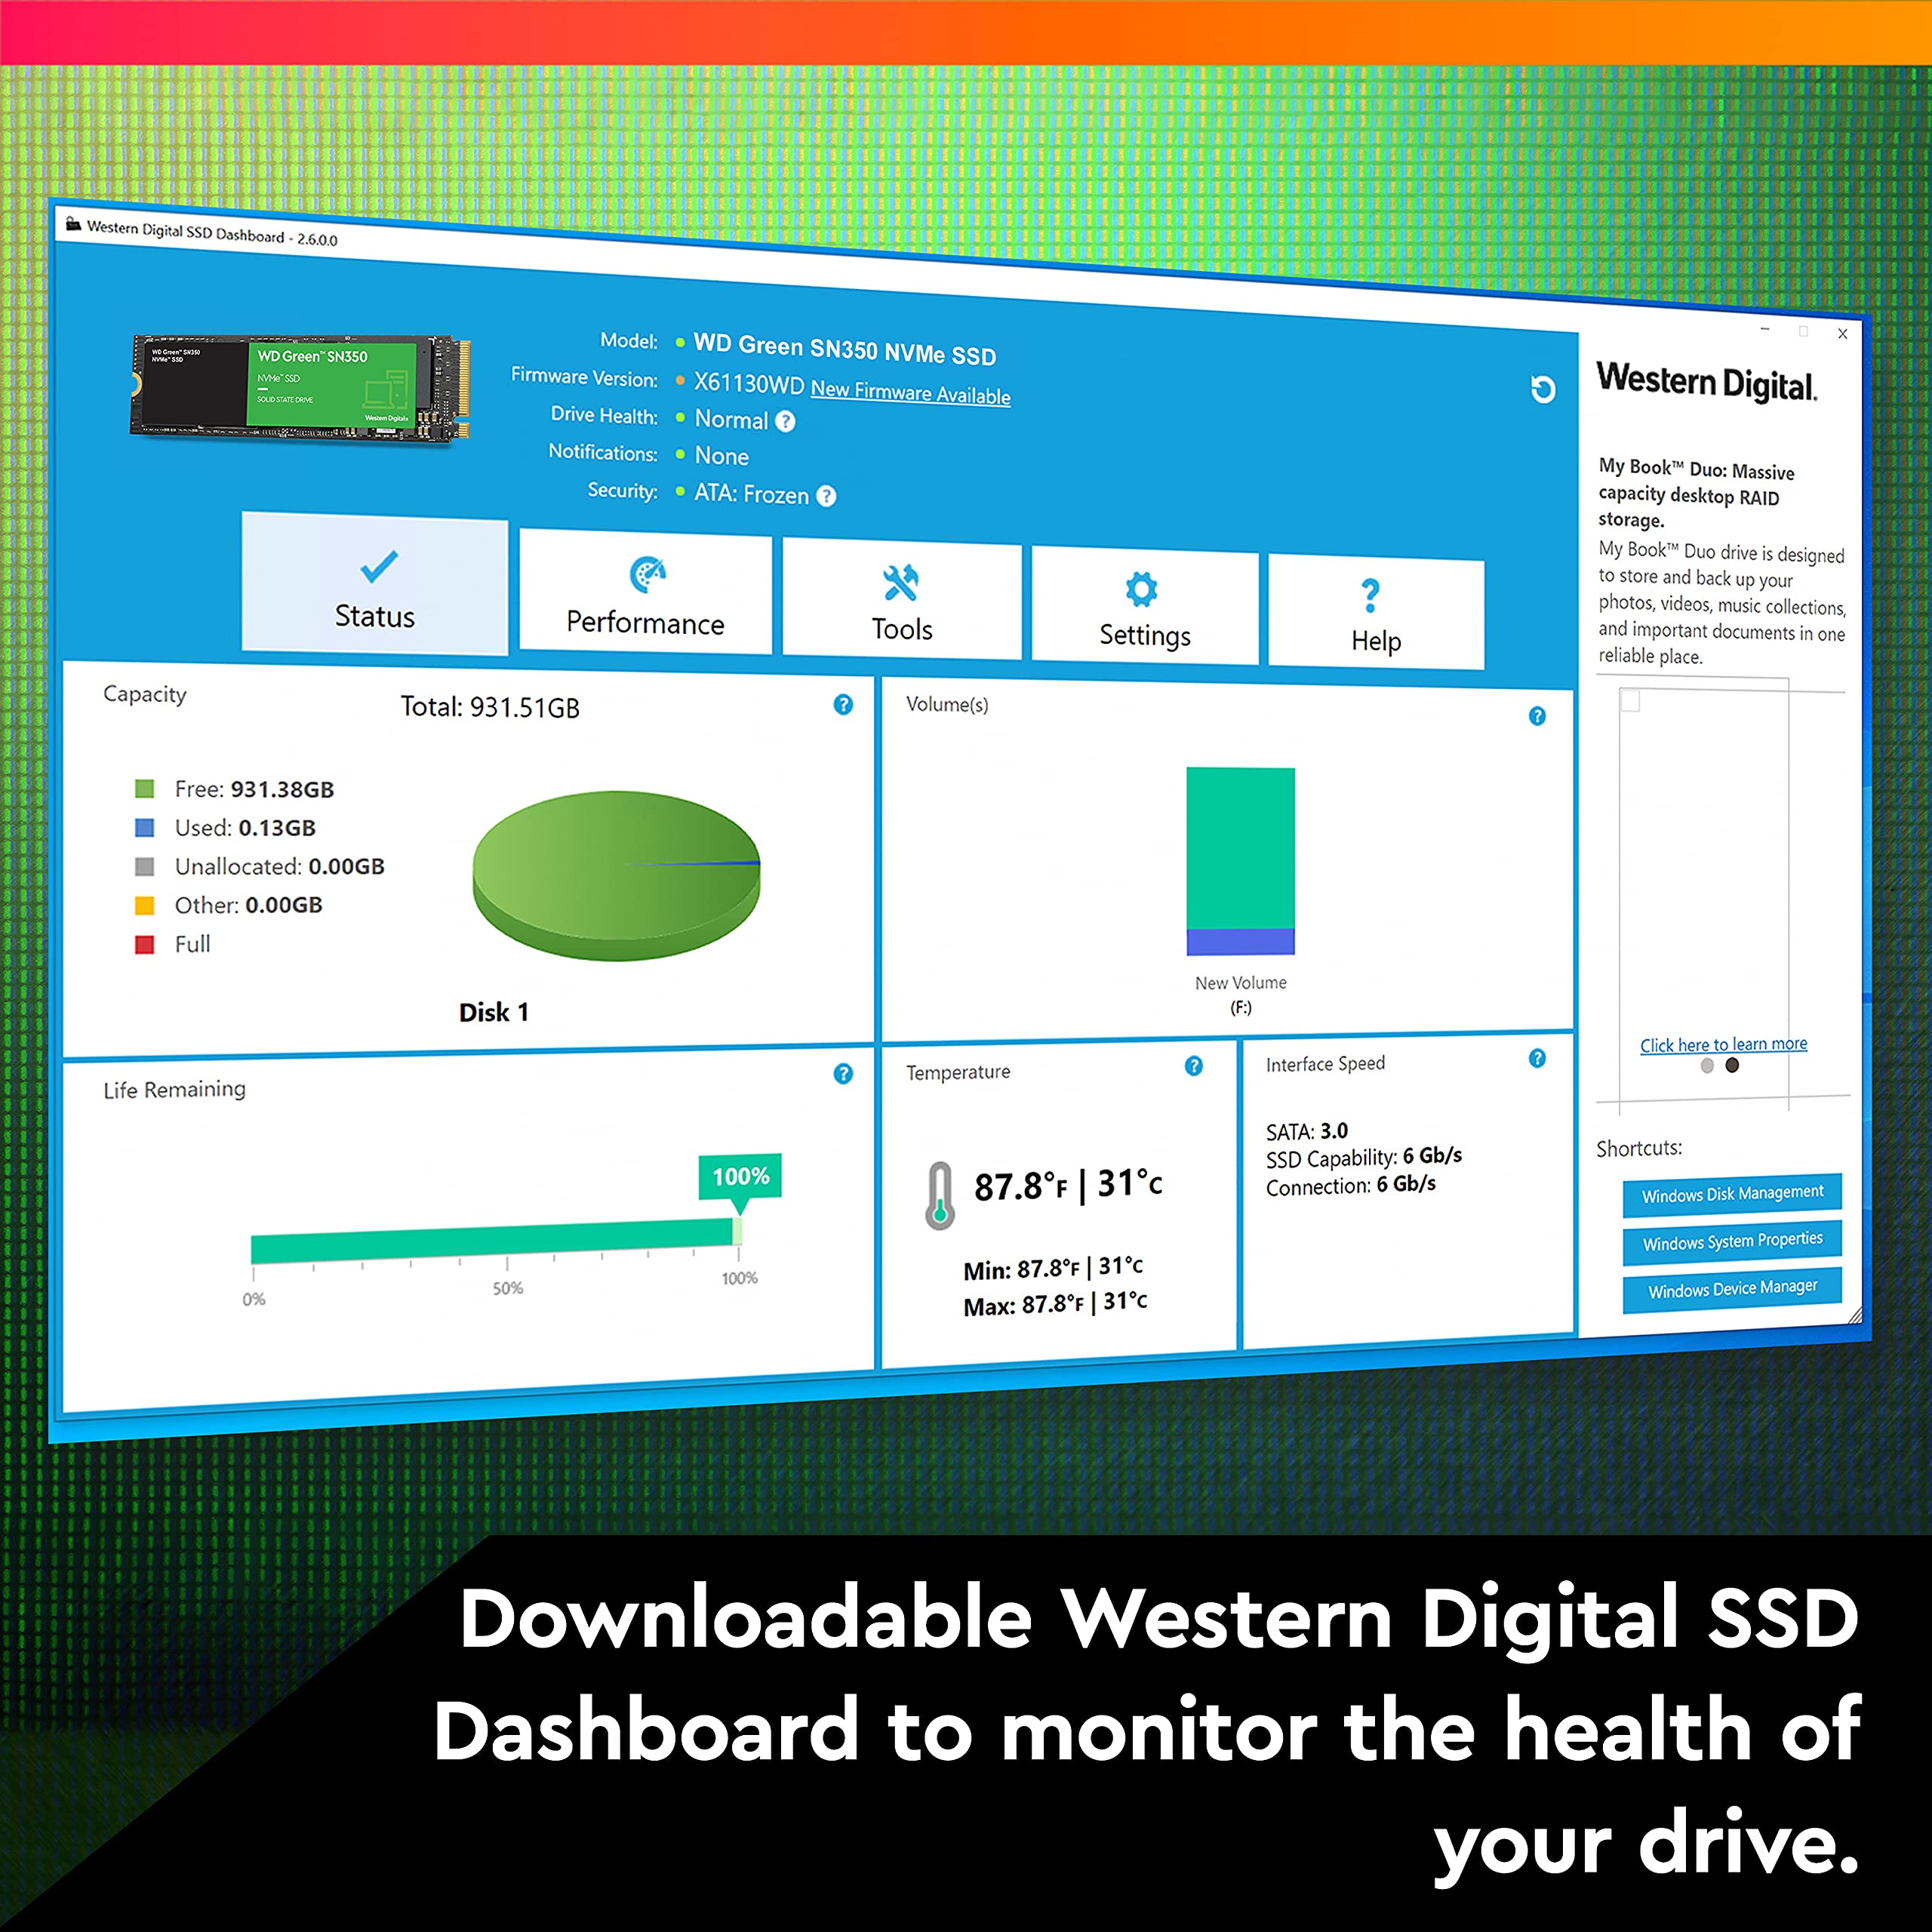 Western Digital 240GB WD Green SN350 NVMe Internal SSD Solid State Drive - Gen3 PCIe, M.2 2280, Up to 2,400 MB/s - WDS240G2G0C